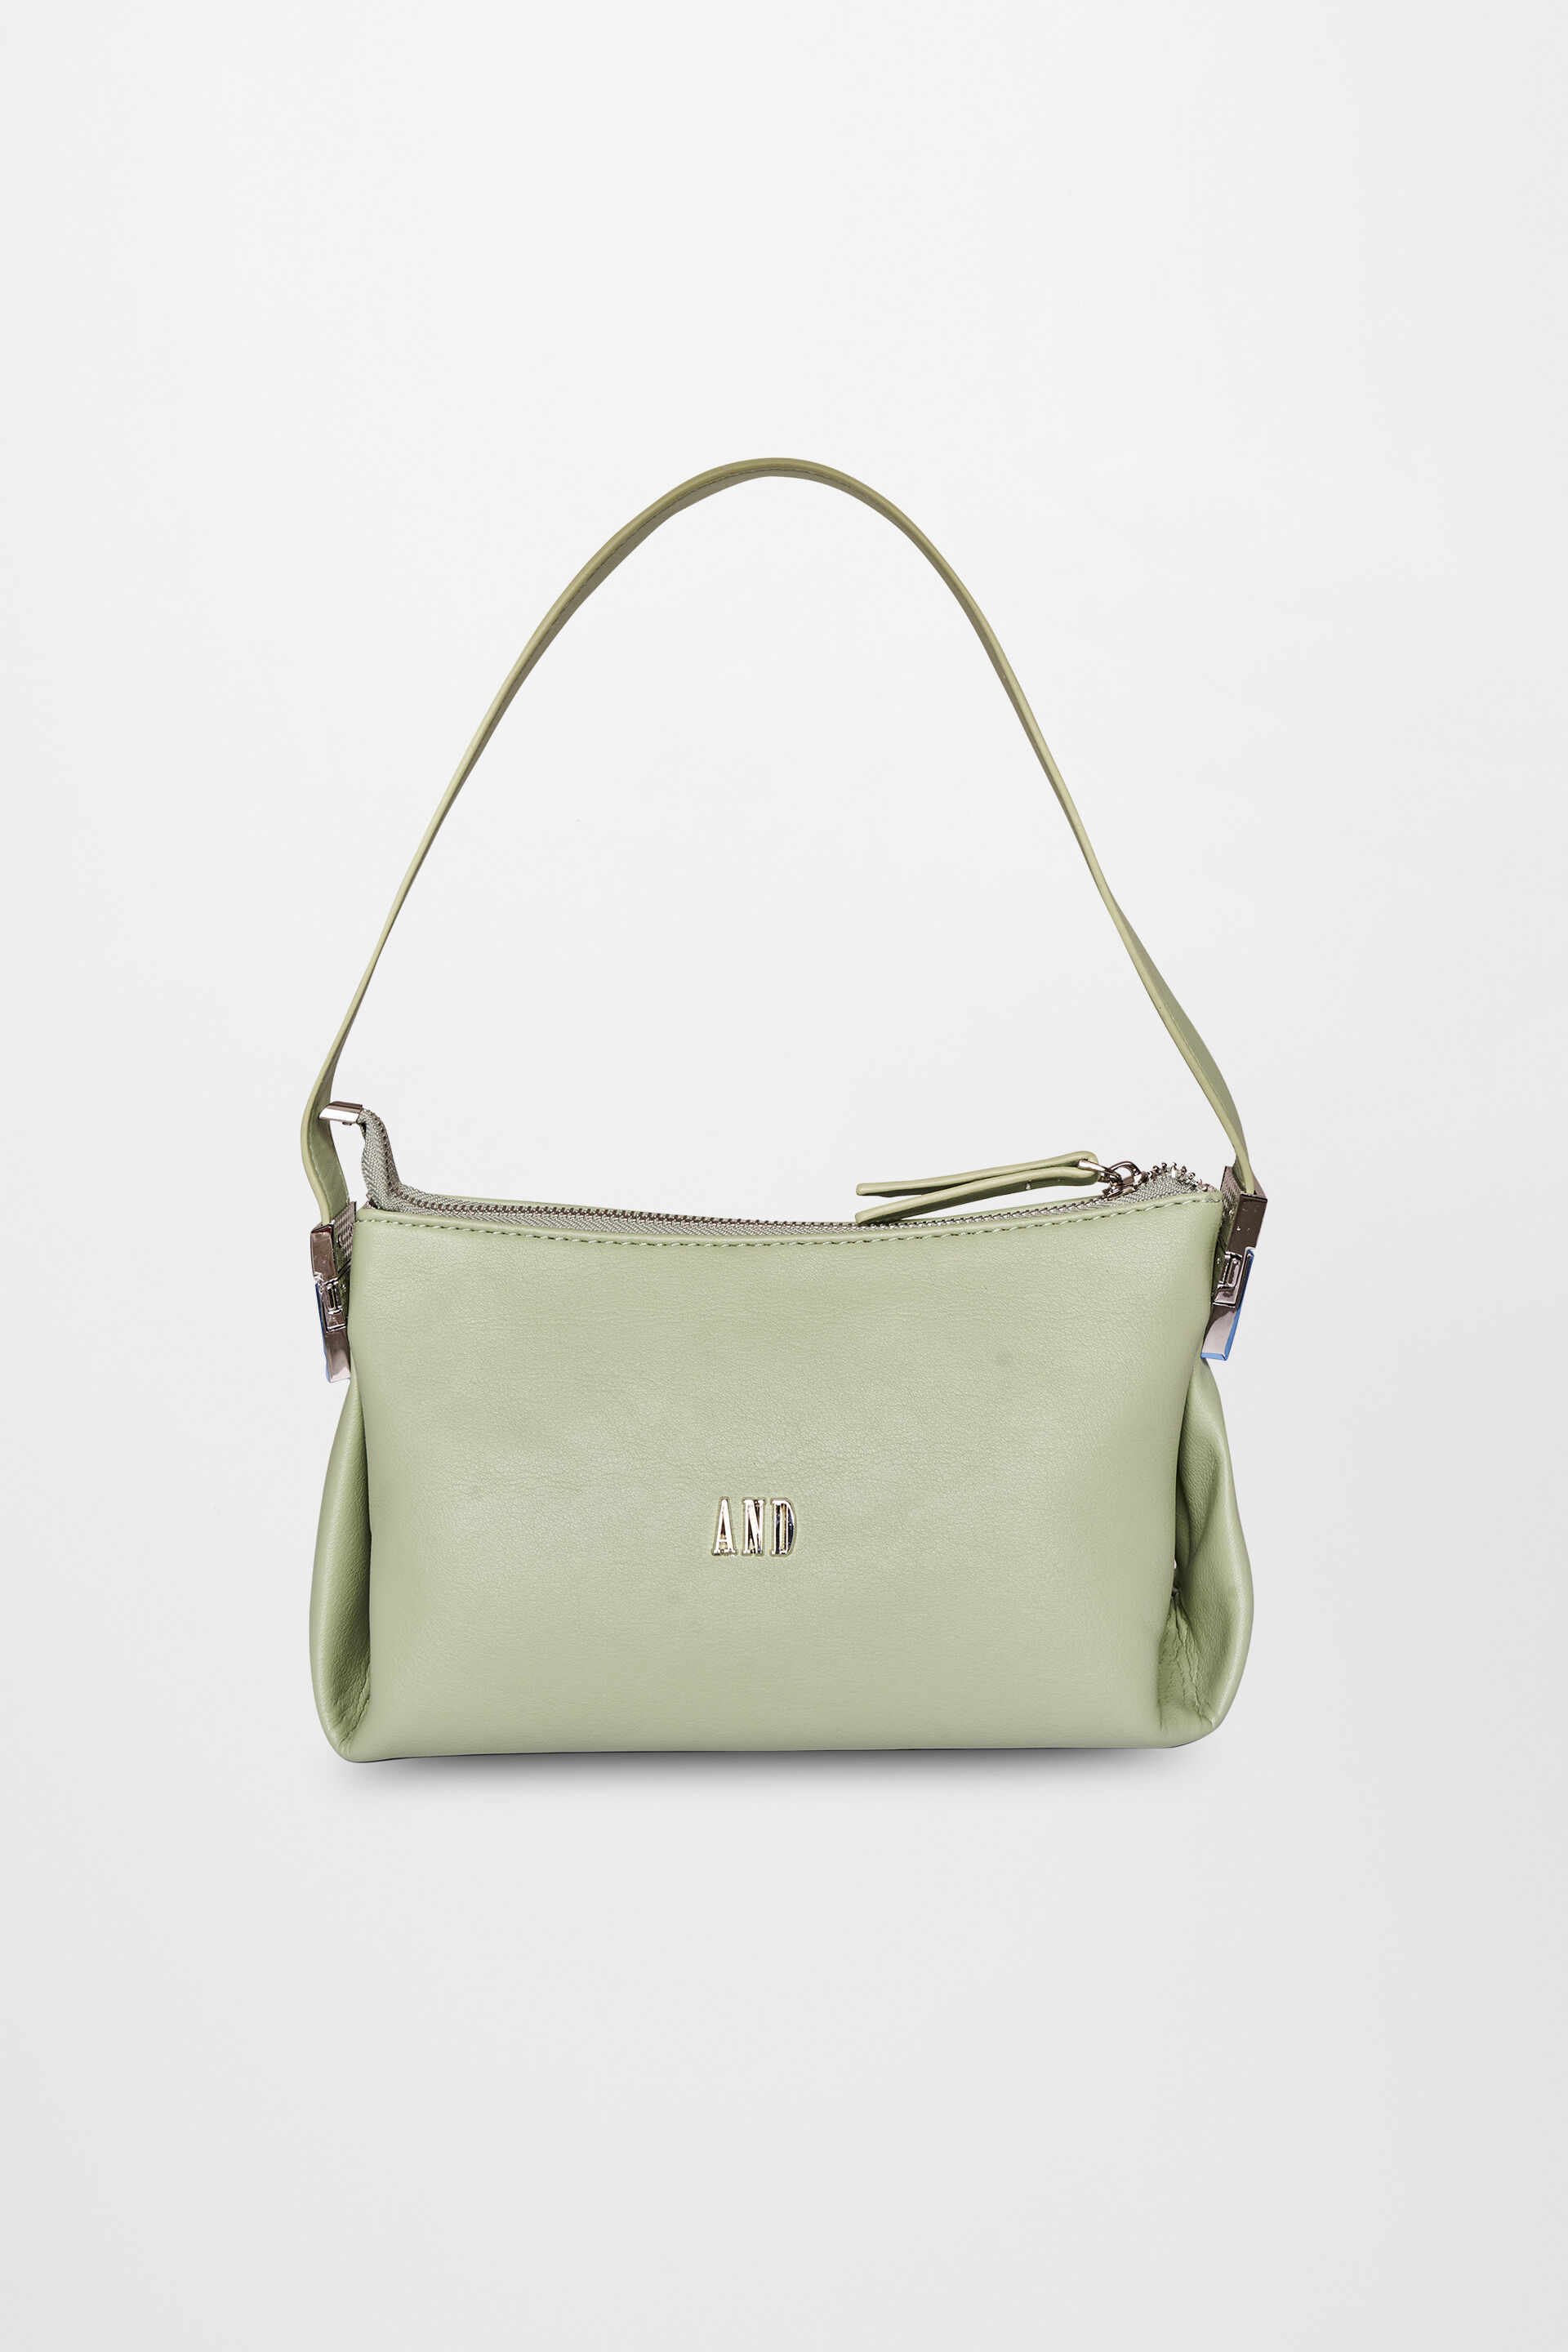 Shop Finest Bags For Women At Best Prices